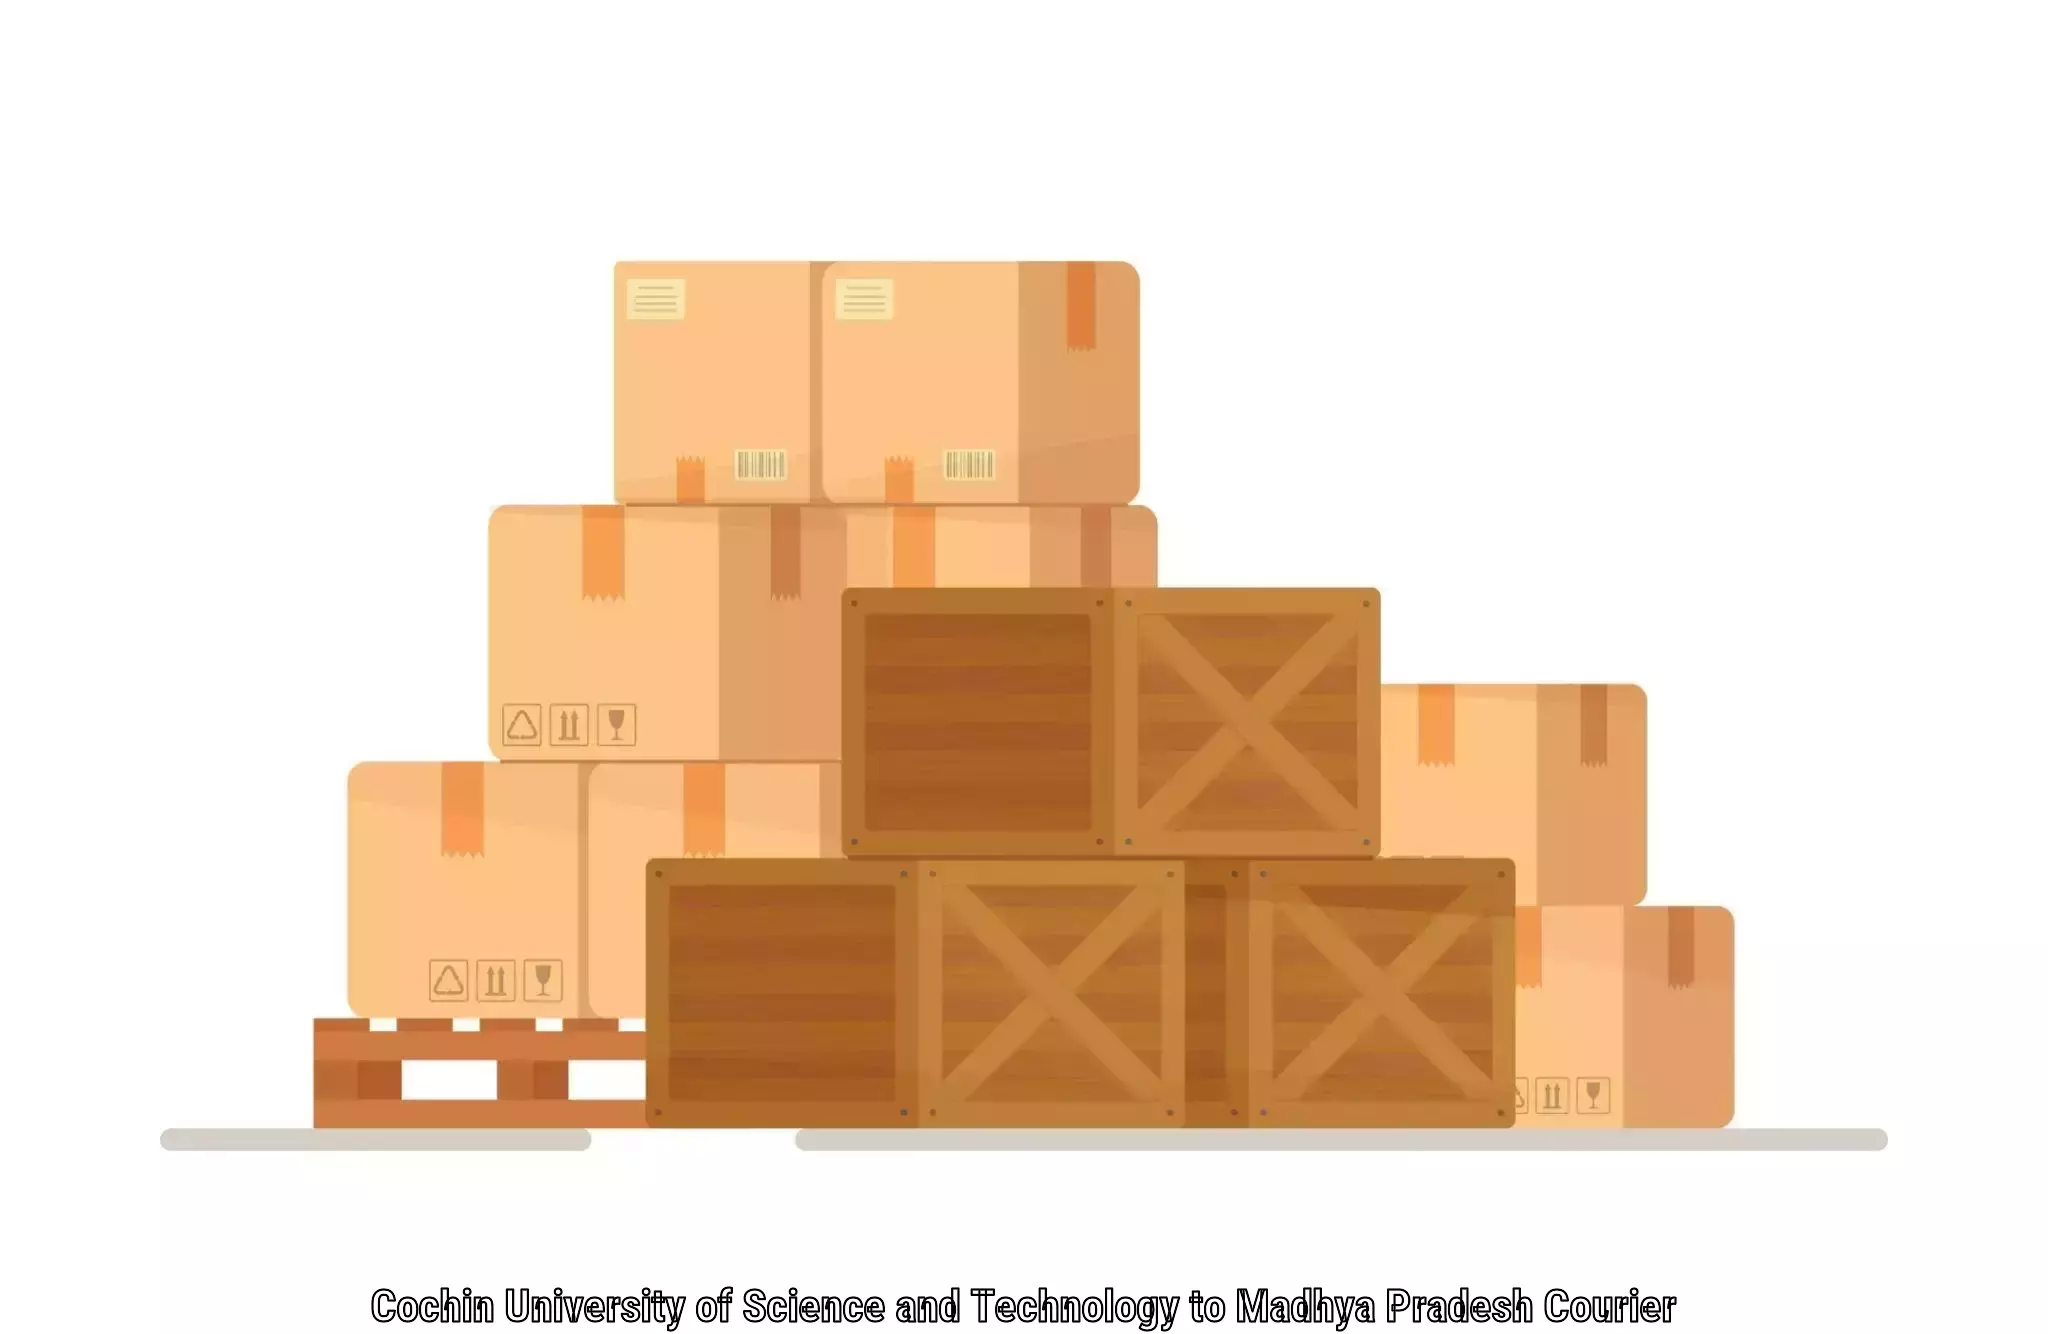 Custom courier packaging in Cochin University of Science and Technology to Jaisinghnagar